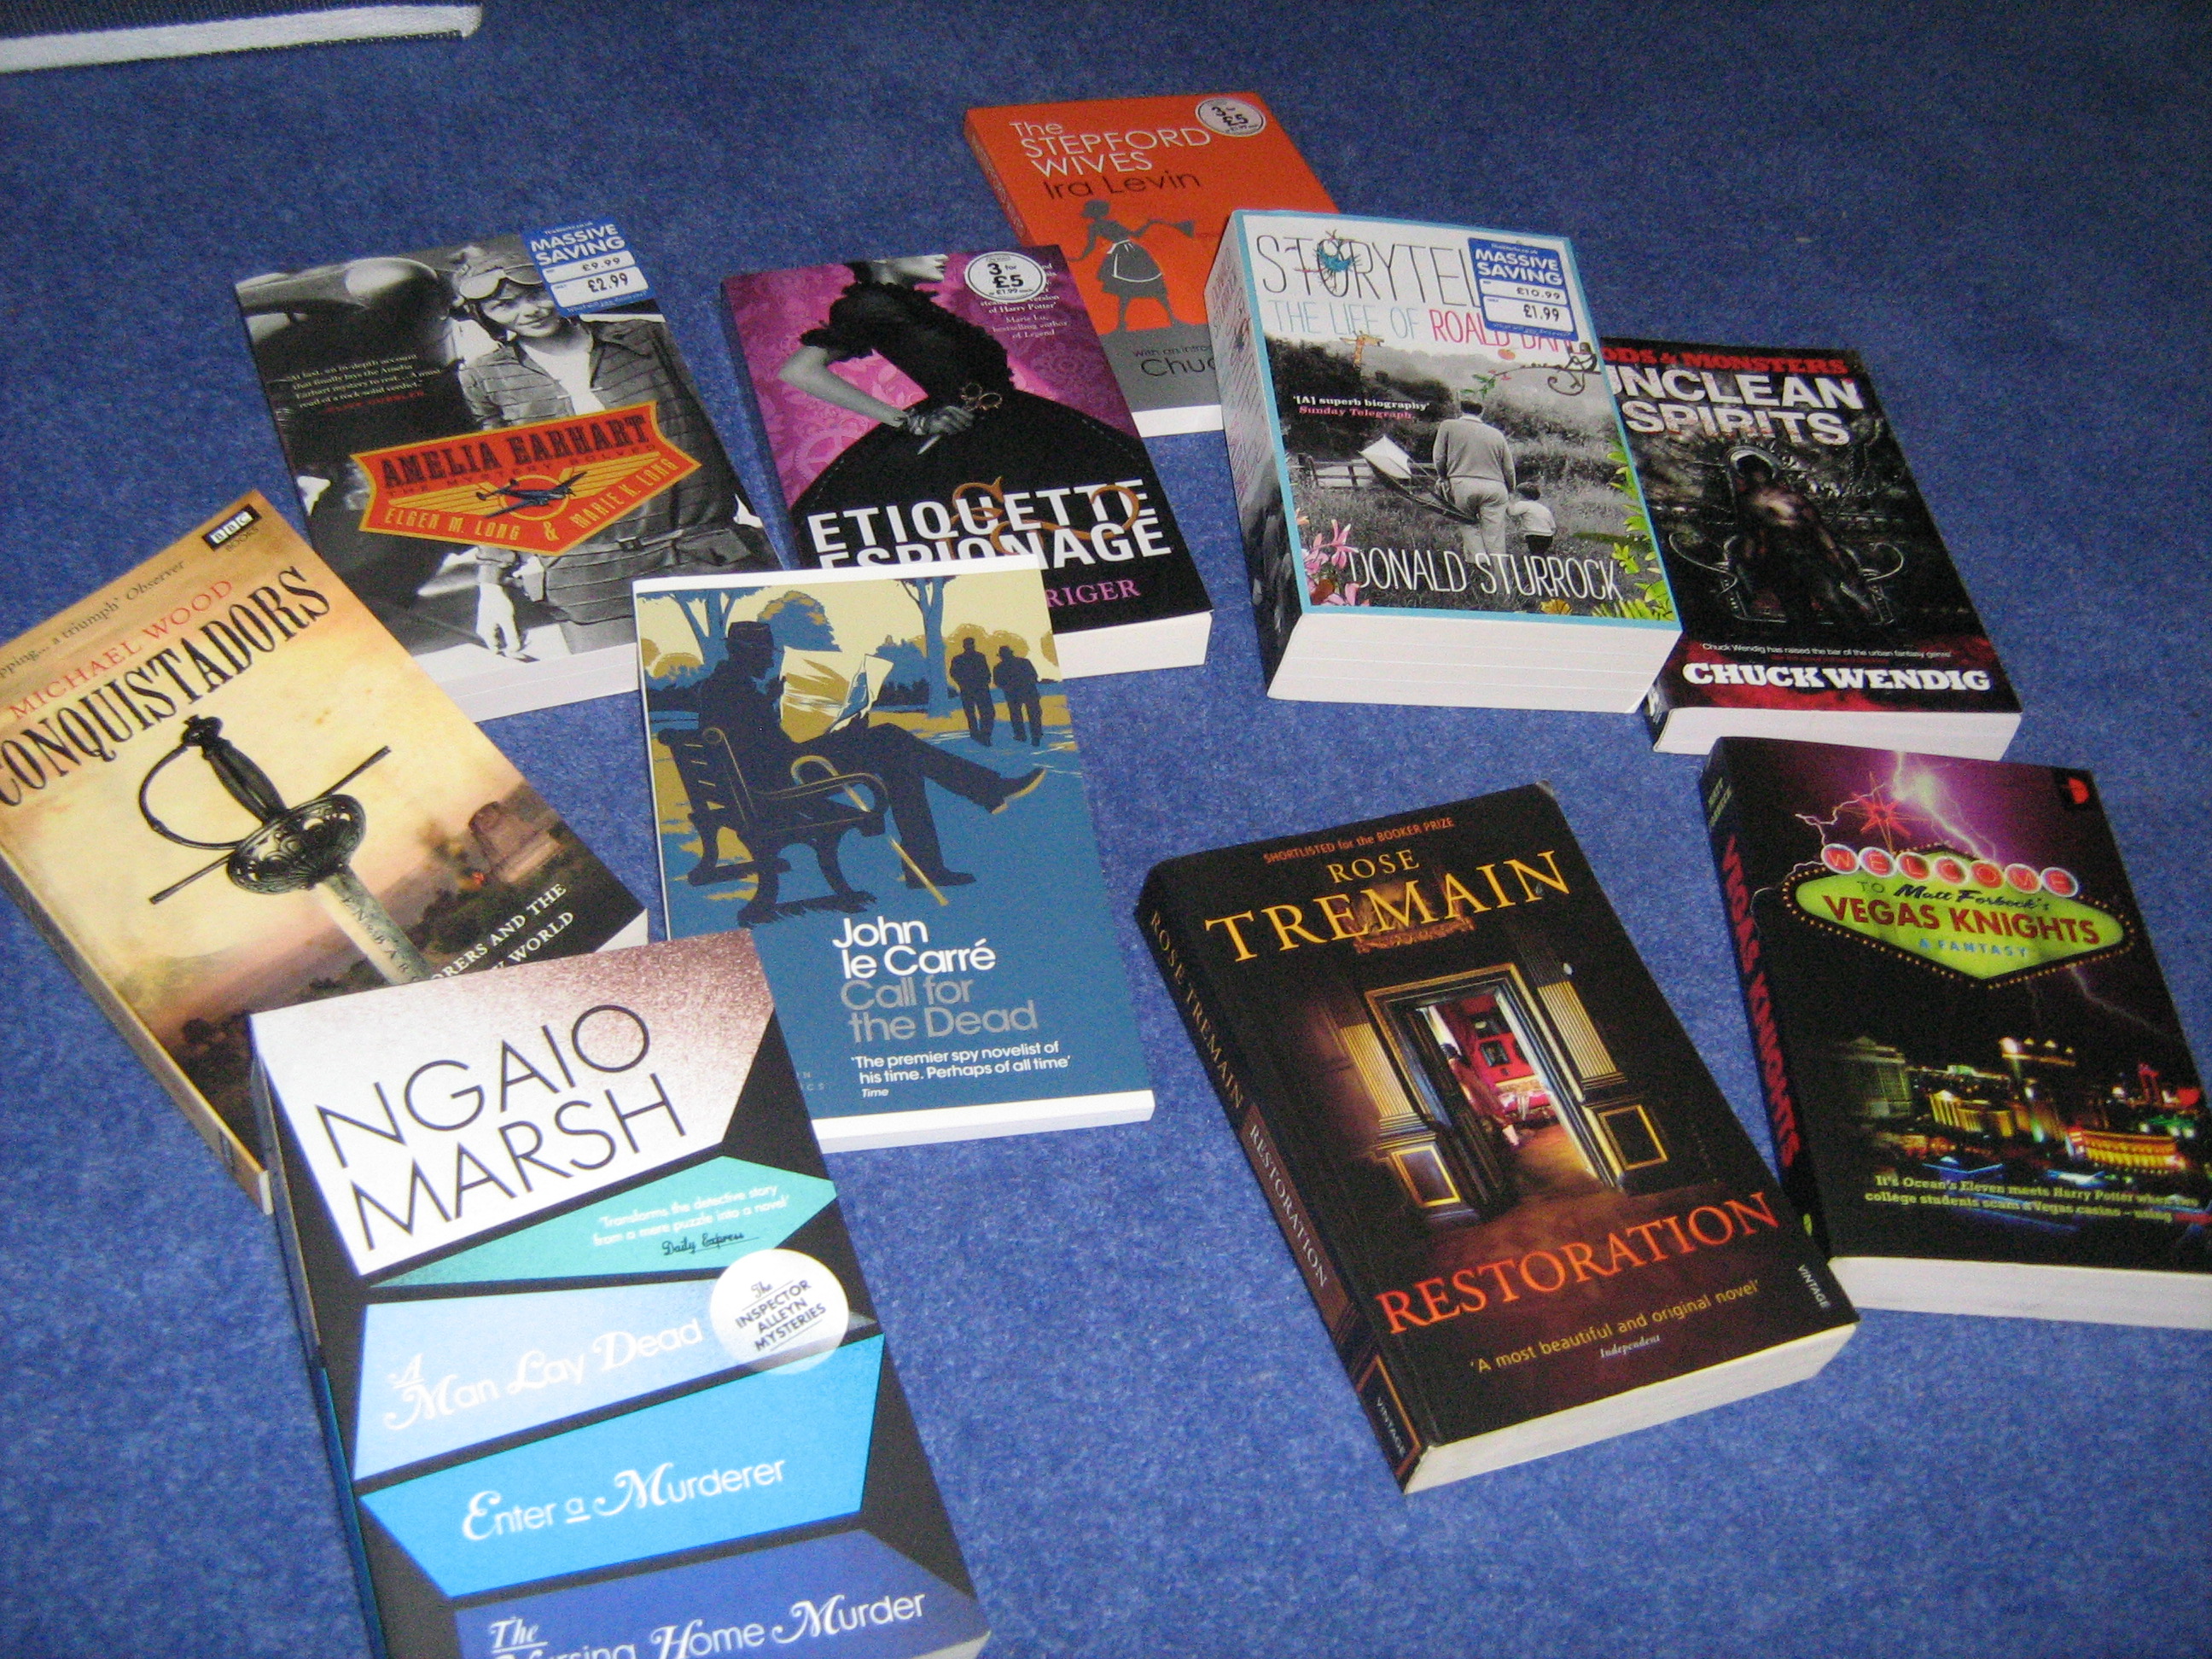 A photo of all the books I bought today